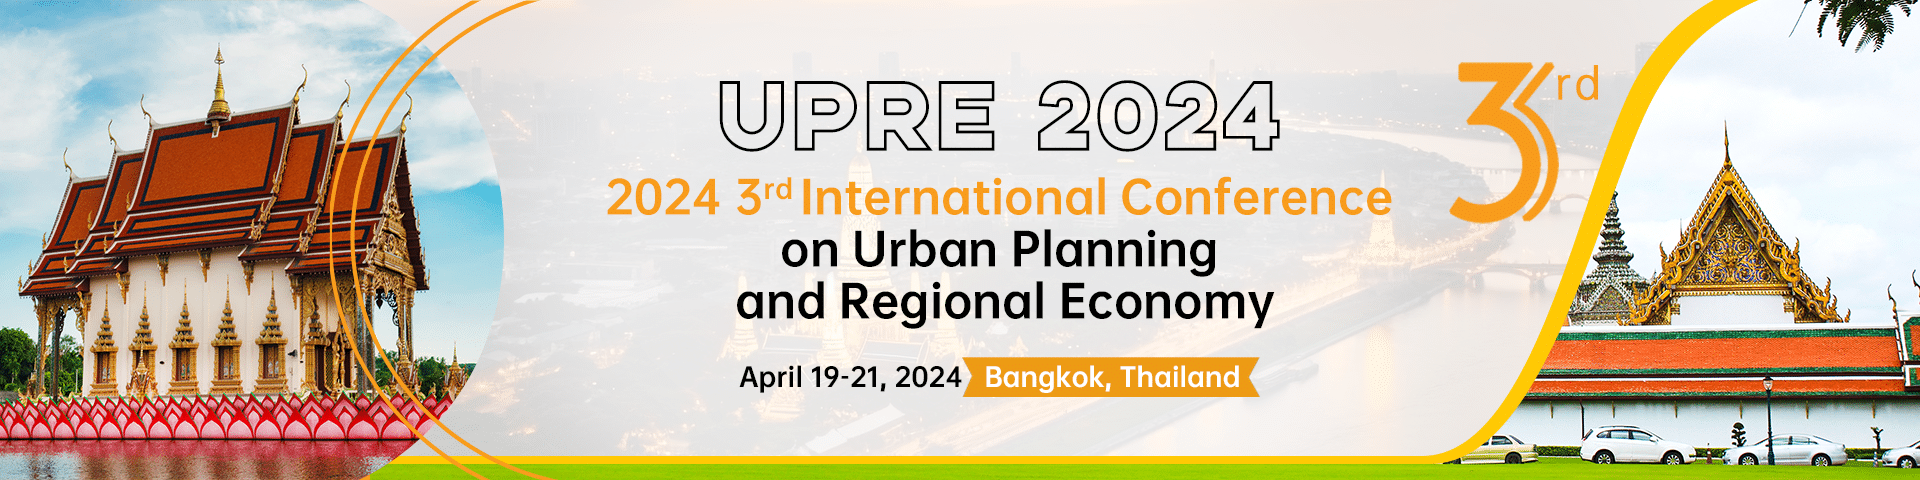 2024 3rd International Conference on Urban Planning and Regional Economy(UPRE 2024)